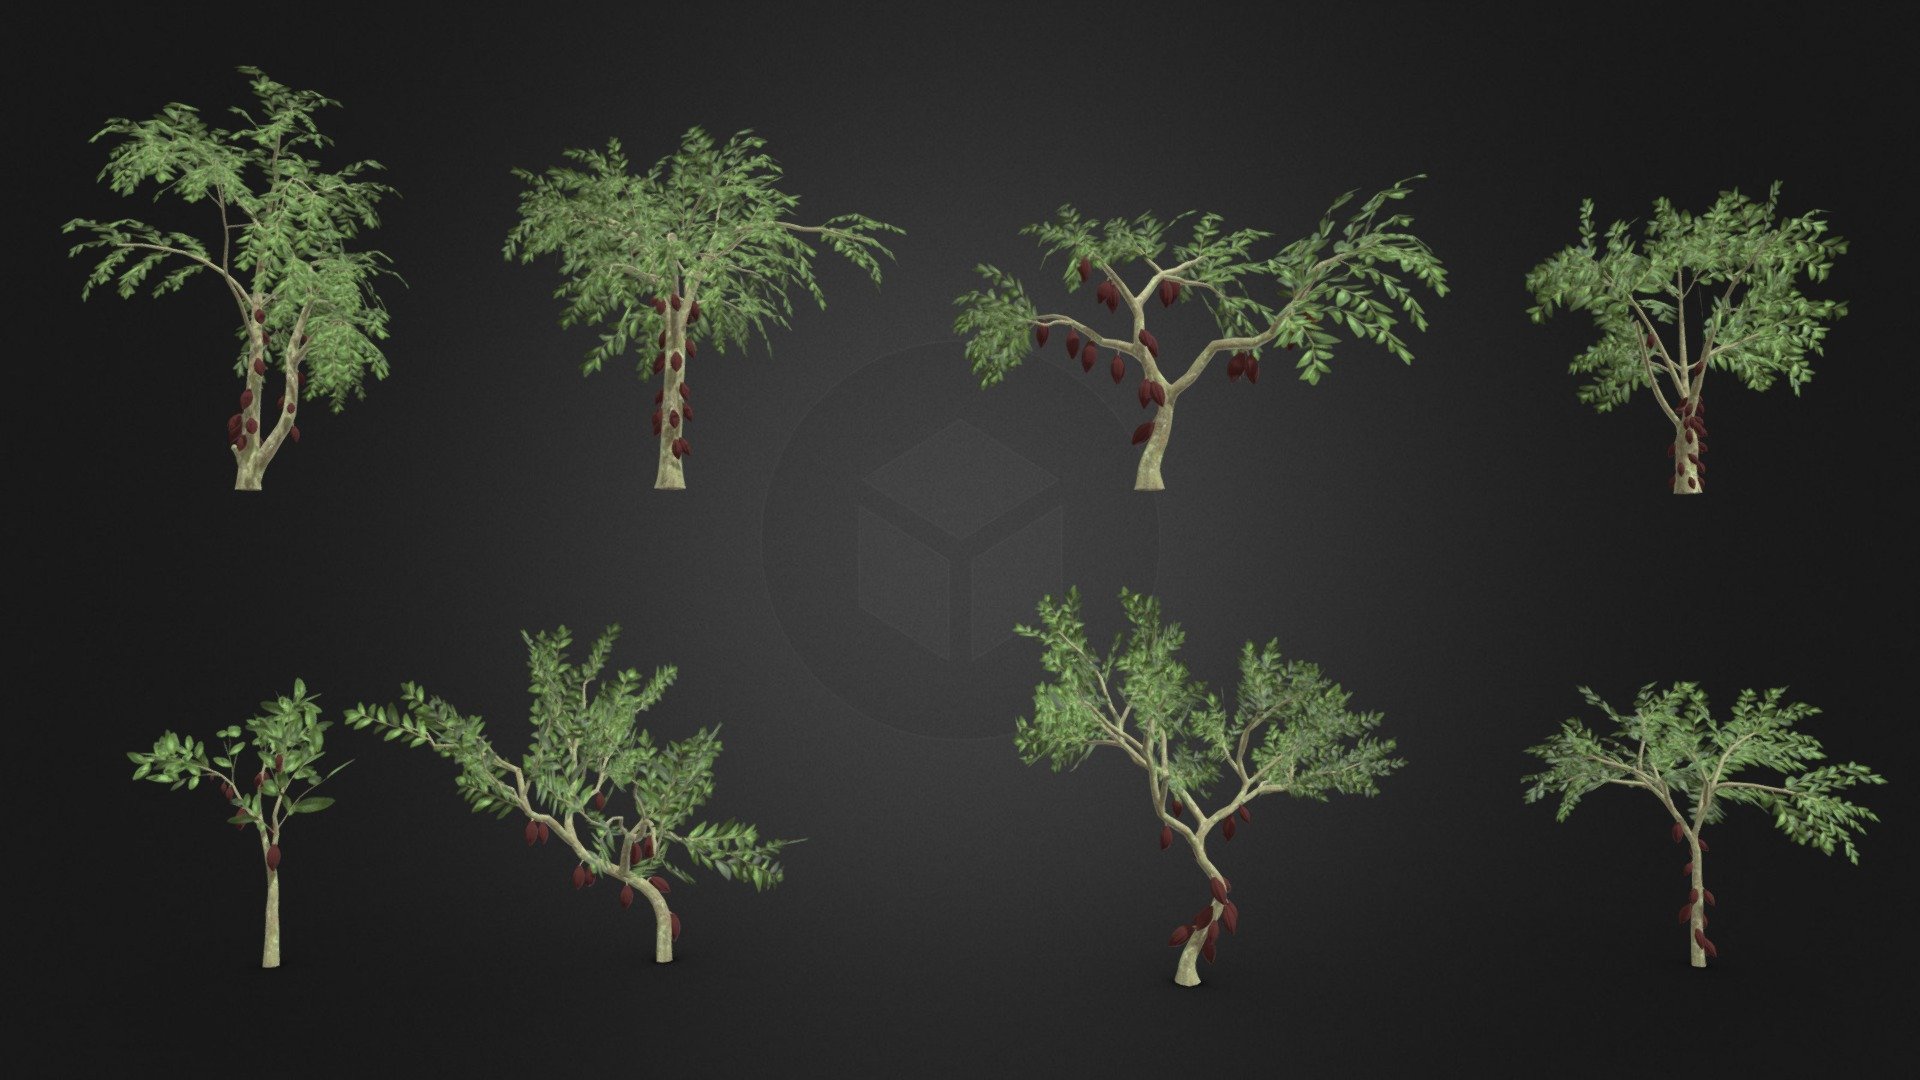 This is a 3D low poly model of a Cacao tree pack. This pack contains 4 models that you can use in your projects.

Info:

Theobroma cacao is a small evergreen tree in the family Malvaceae. Its seeds, cocoa beans, are used to make chocolate liquor, cocoa solids, cocoa butter, and chocolate. Native to the tropics of the Americas, the largest producer of cocoa beans in 2018 was Ivory Coast, at 2.2 million tons 3d model